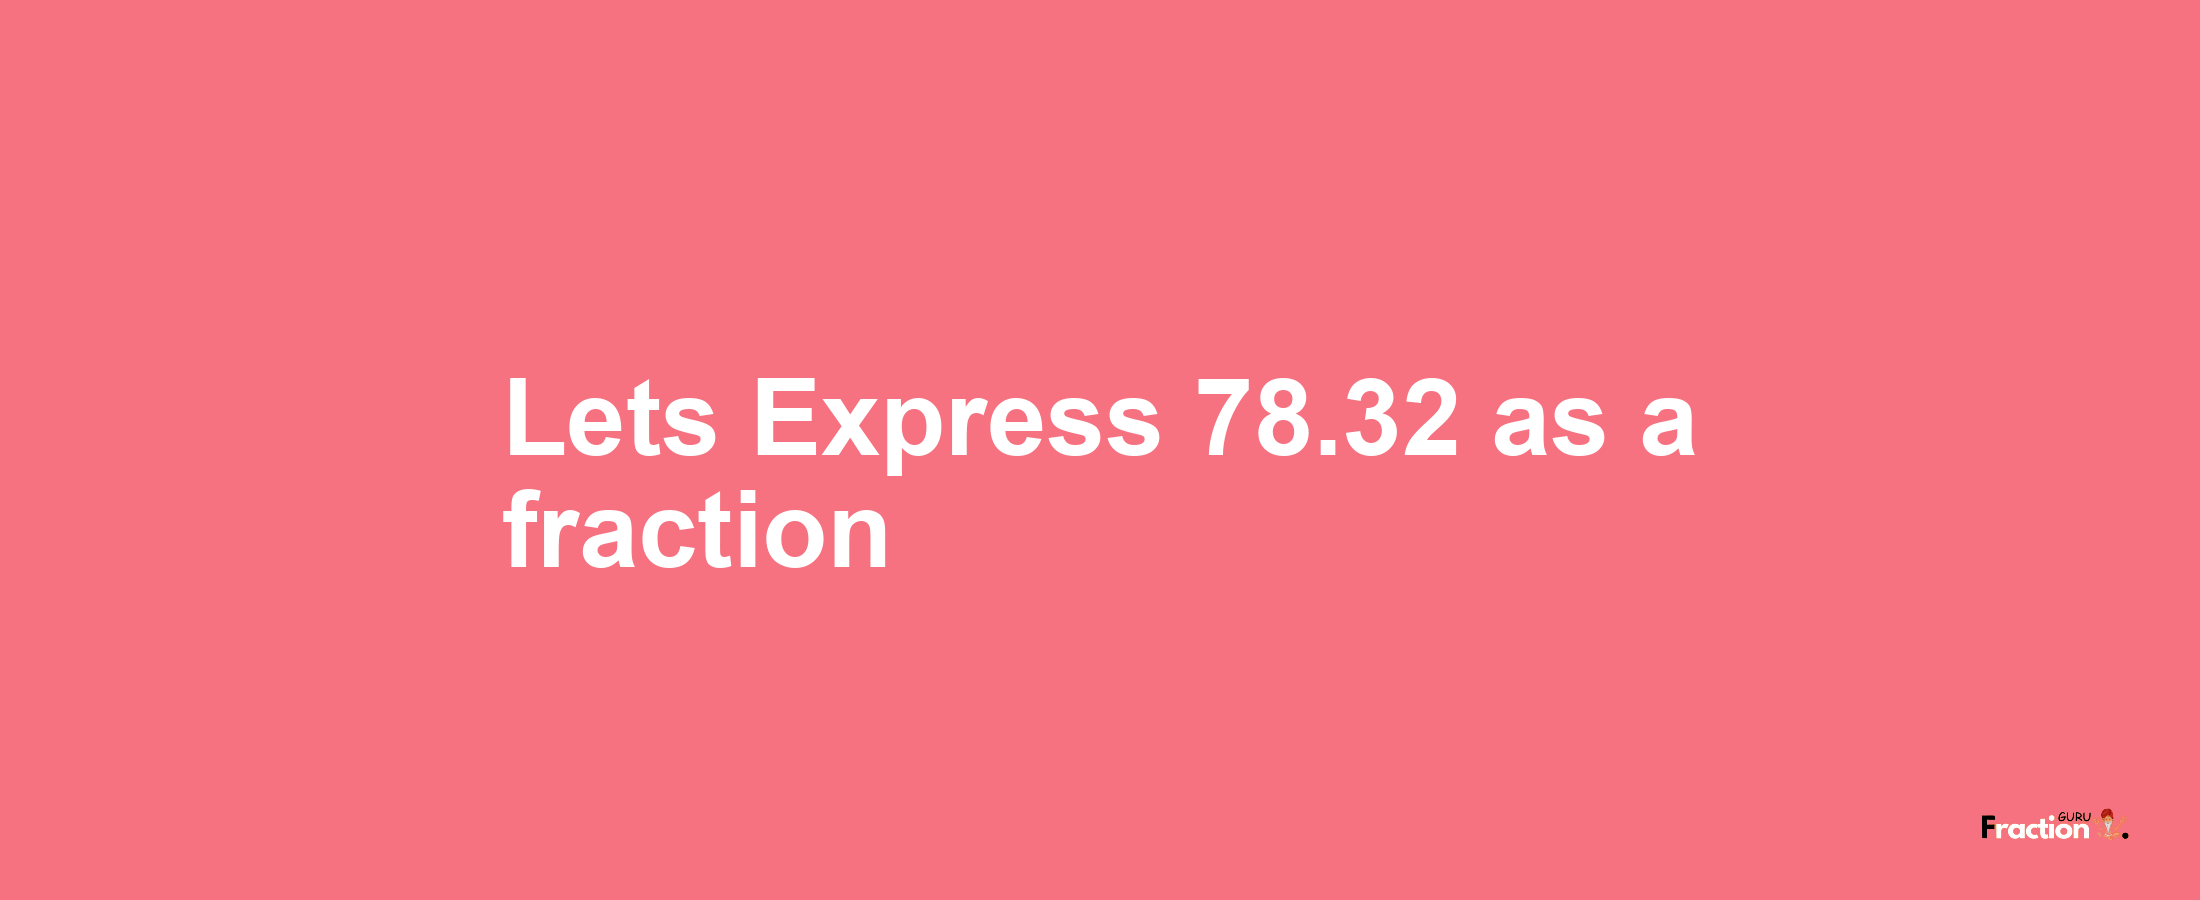 Lets Express 78.32 as afraction